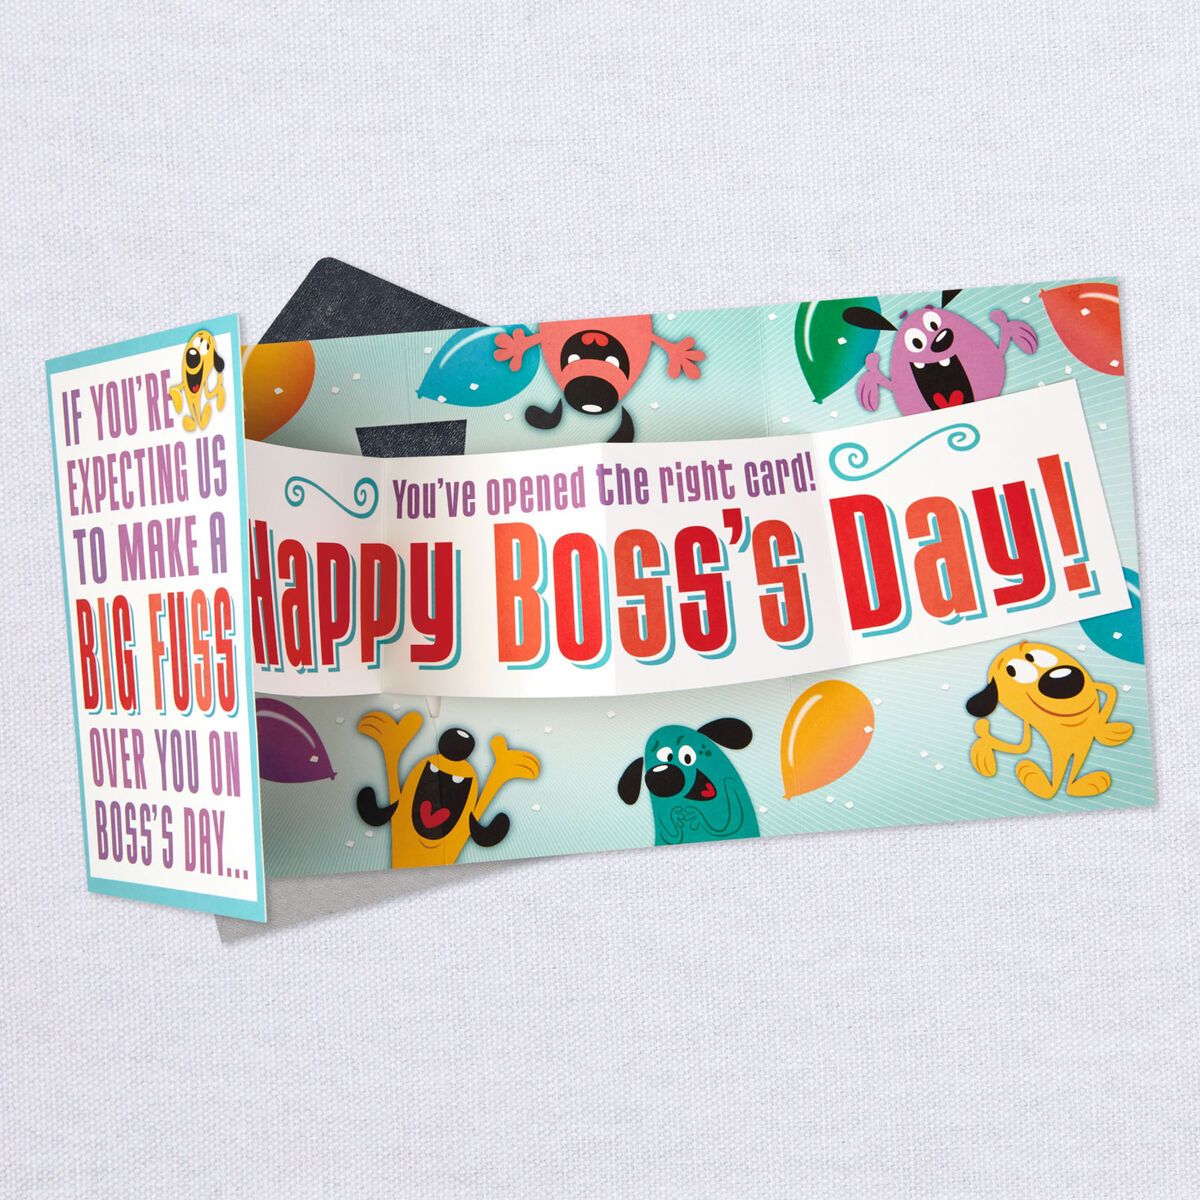 Big Fuss Pop Up Banner Boss's Day Card From Us - Greeting Cards - Hallmark